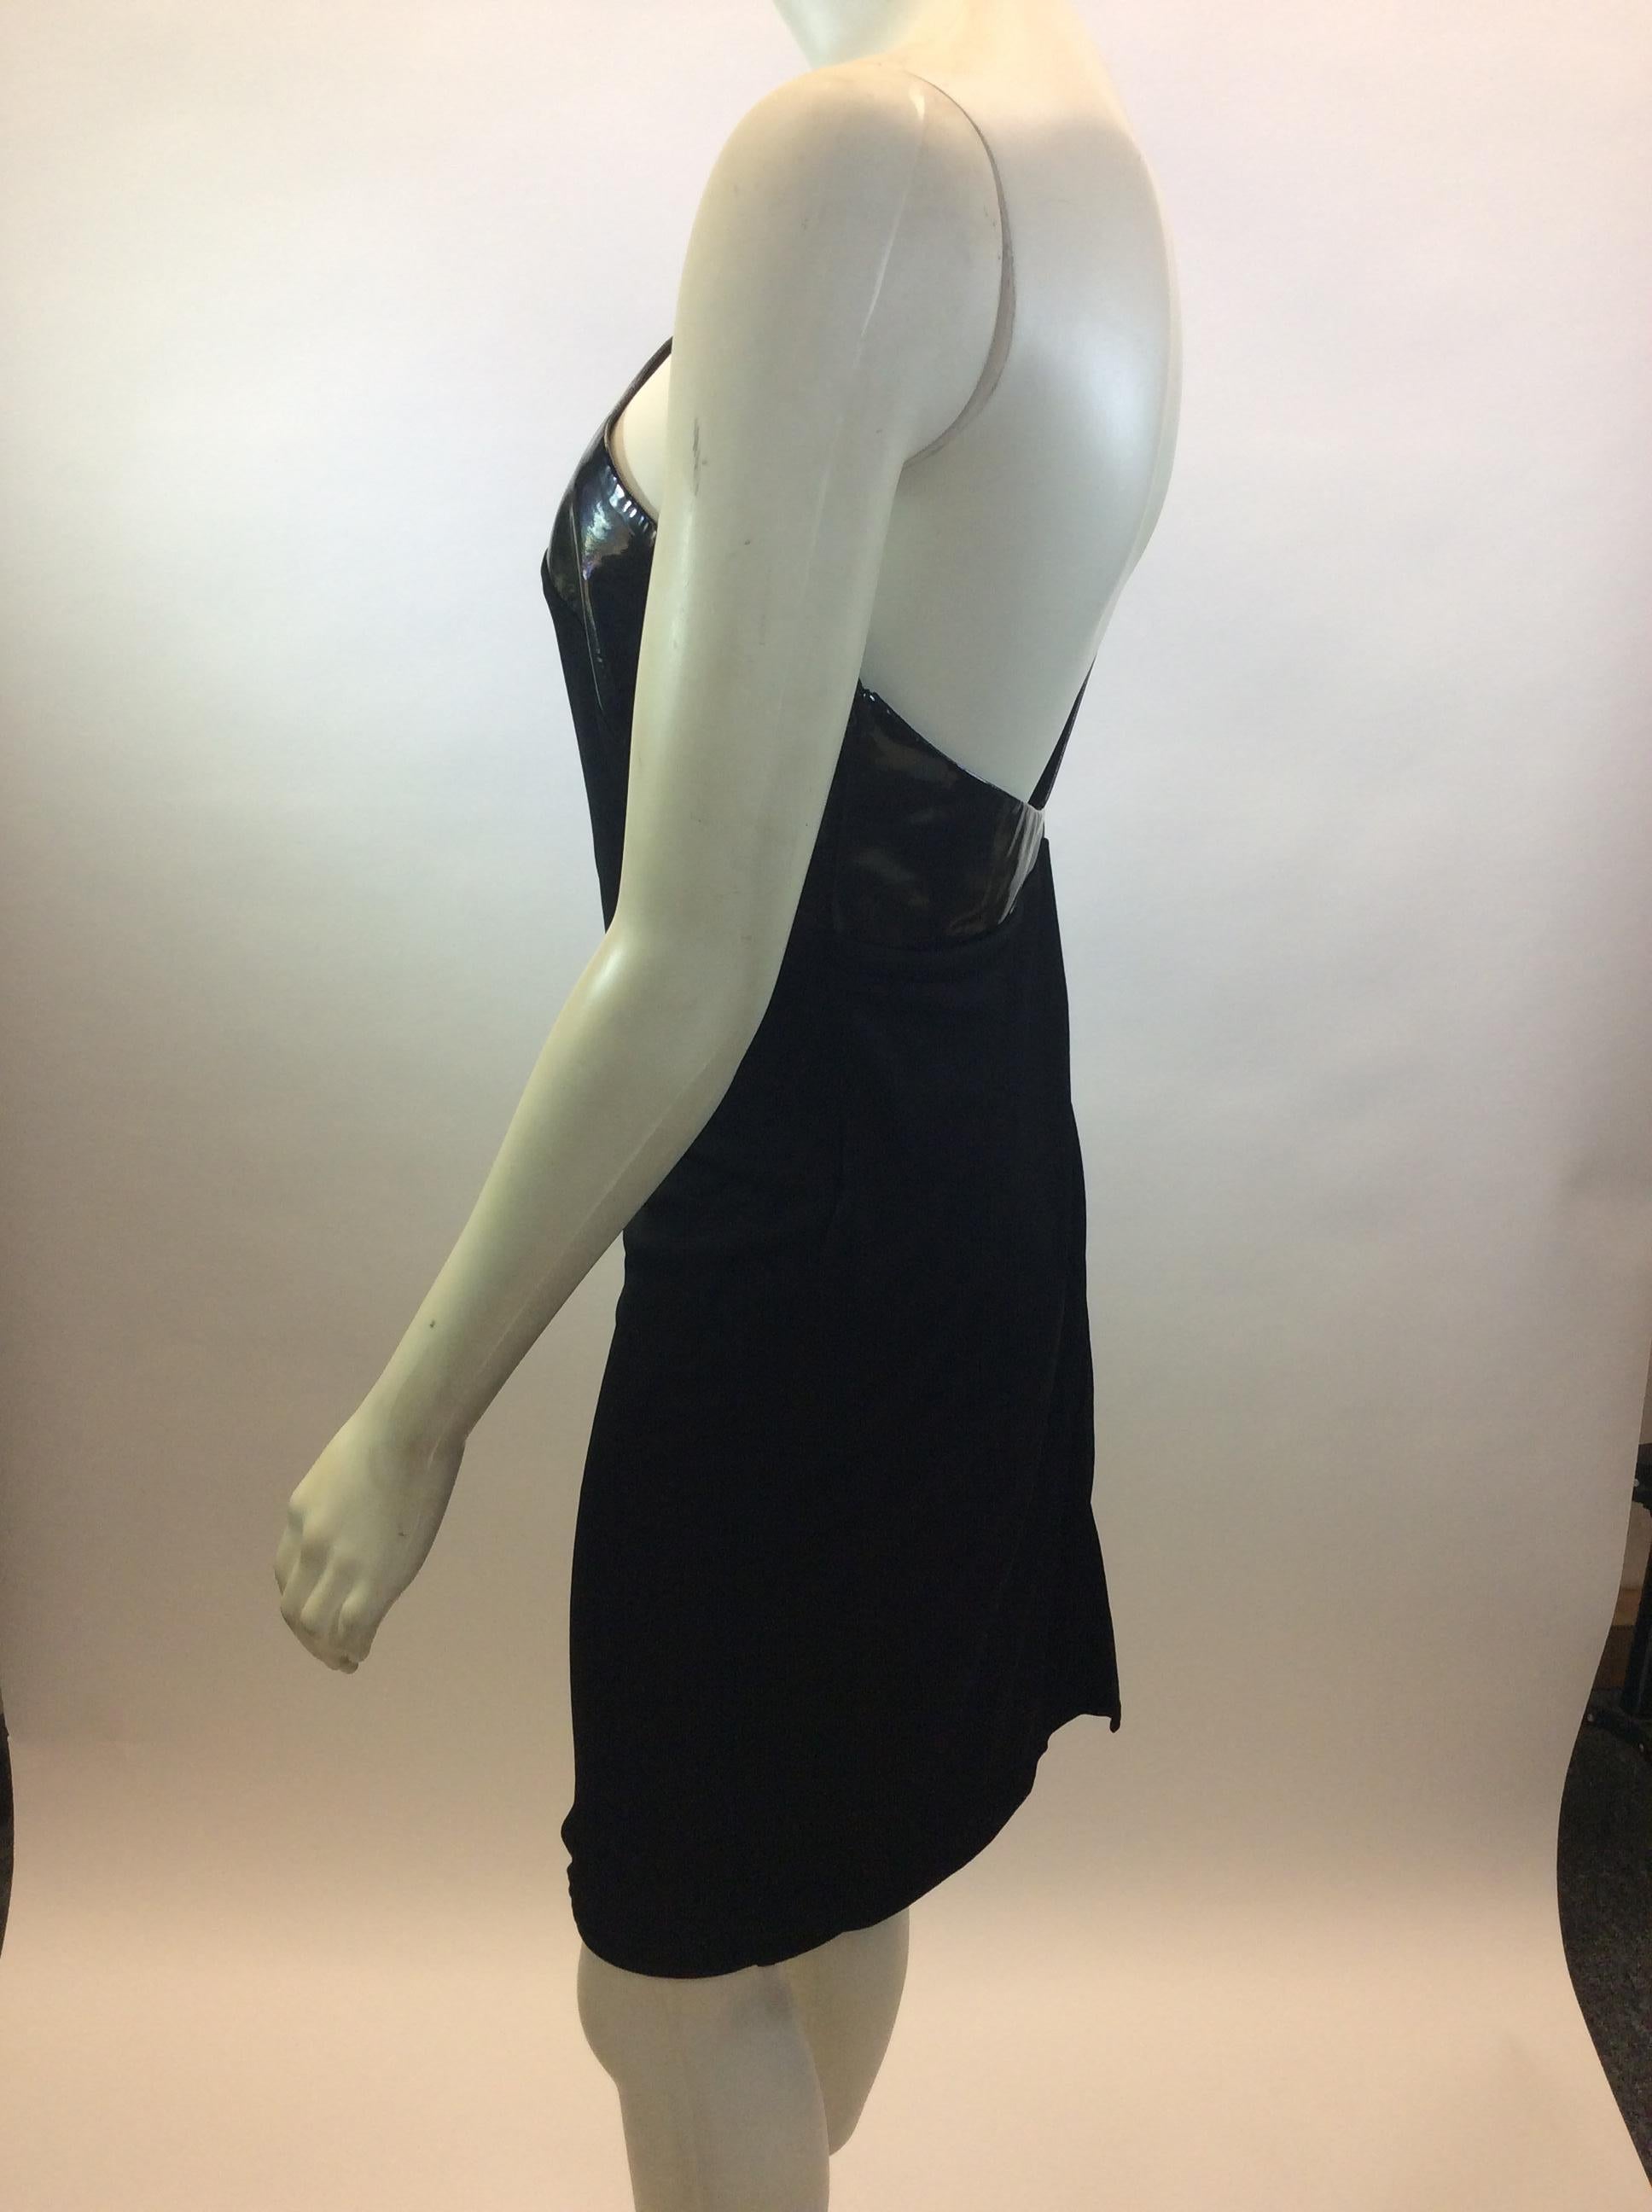 Gucci Black One Shoulder Dress with Leather Detail
$499
Made in Italy
90% Viscose, 10% Leather
Size 38
Length 35.5